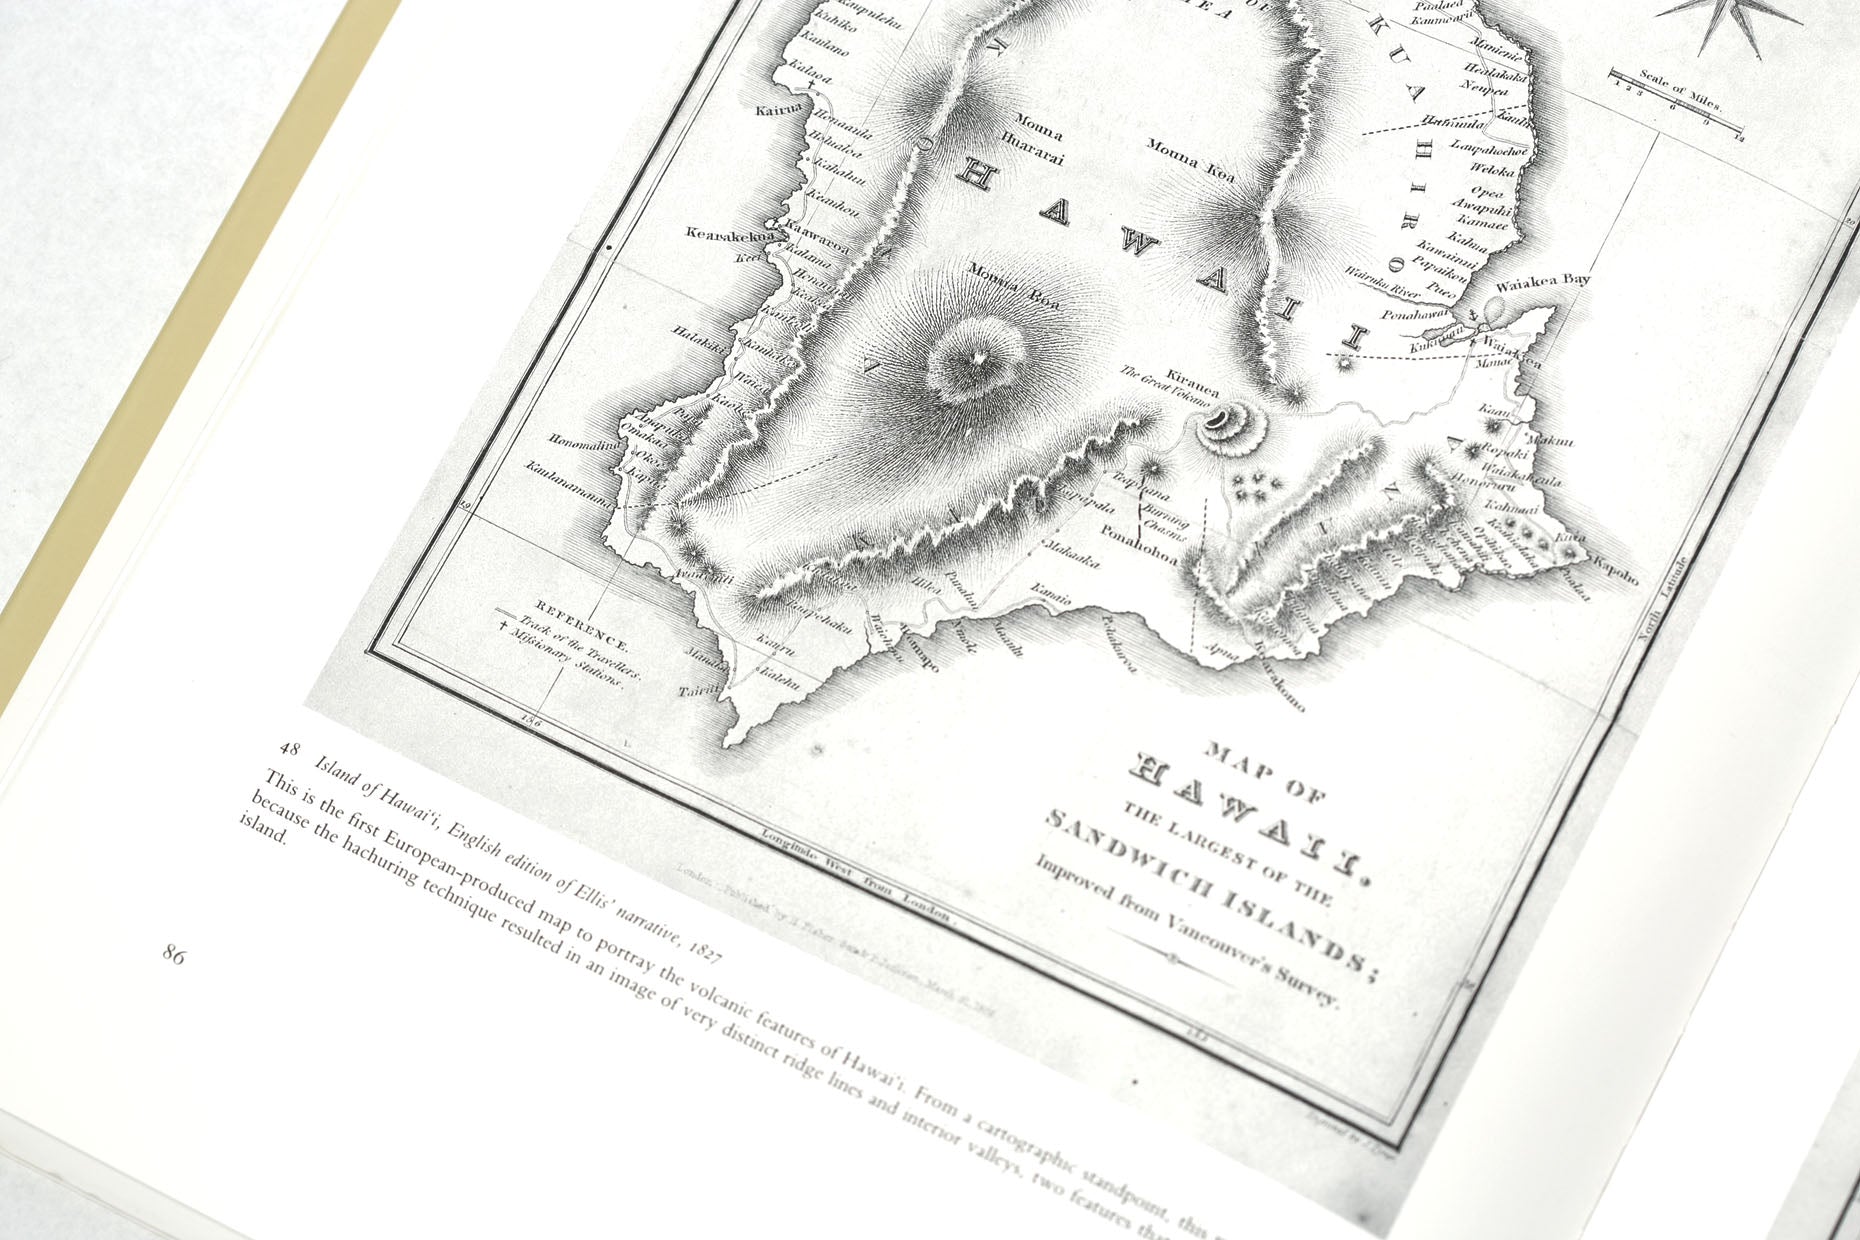 The Early Mapping of Hawaiʻi